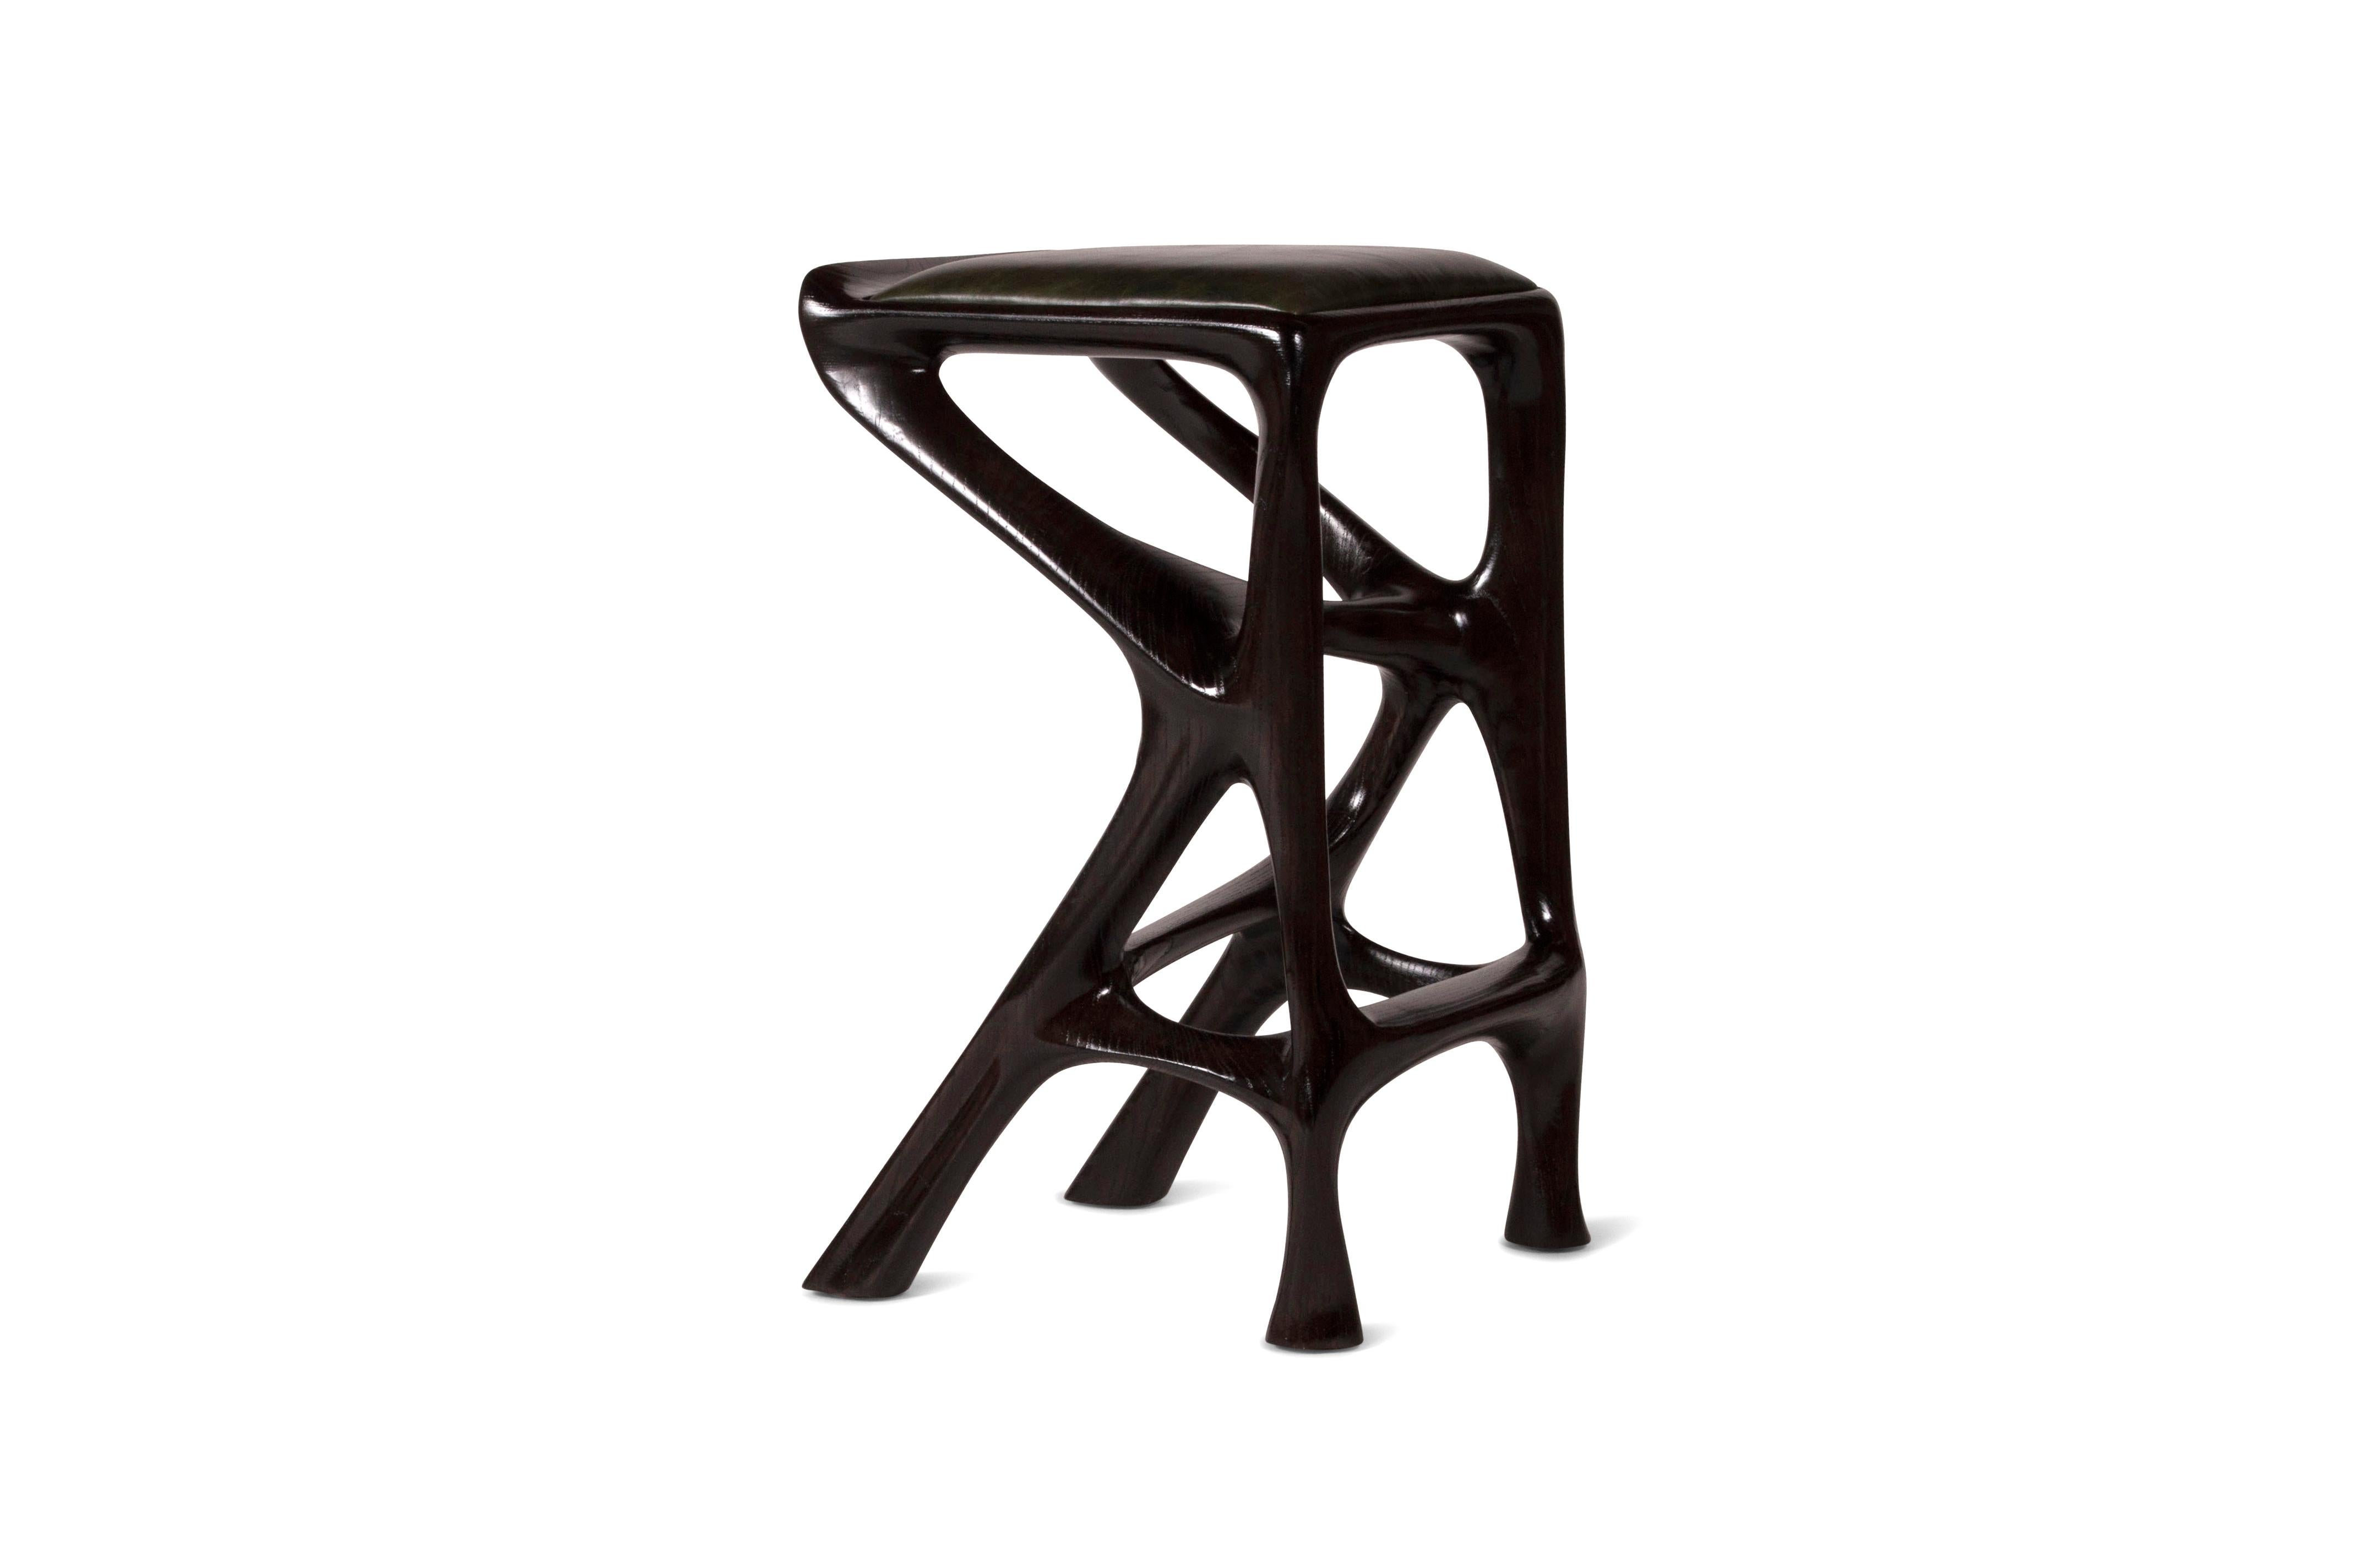 Barstool designed by Amorph made out of solid ashwood and leather. Stain color: Rusted walnut
Dimension 27